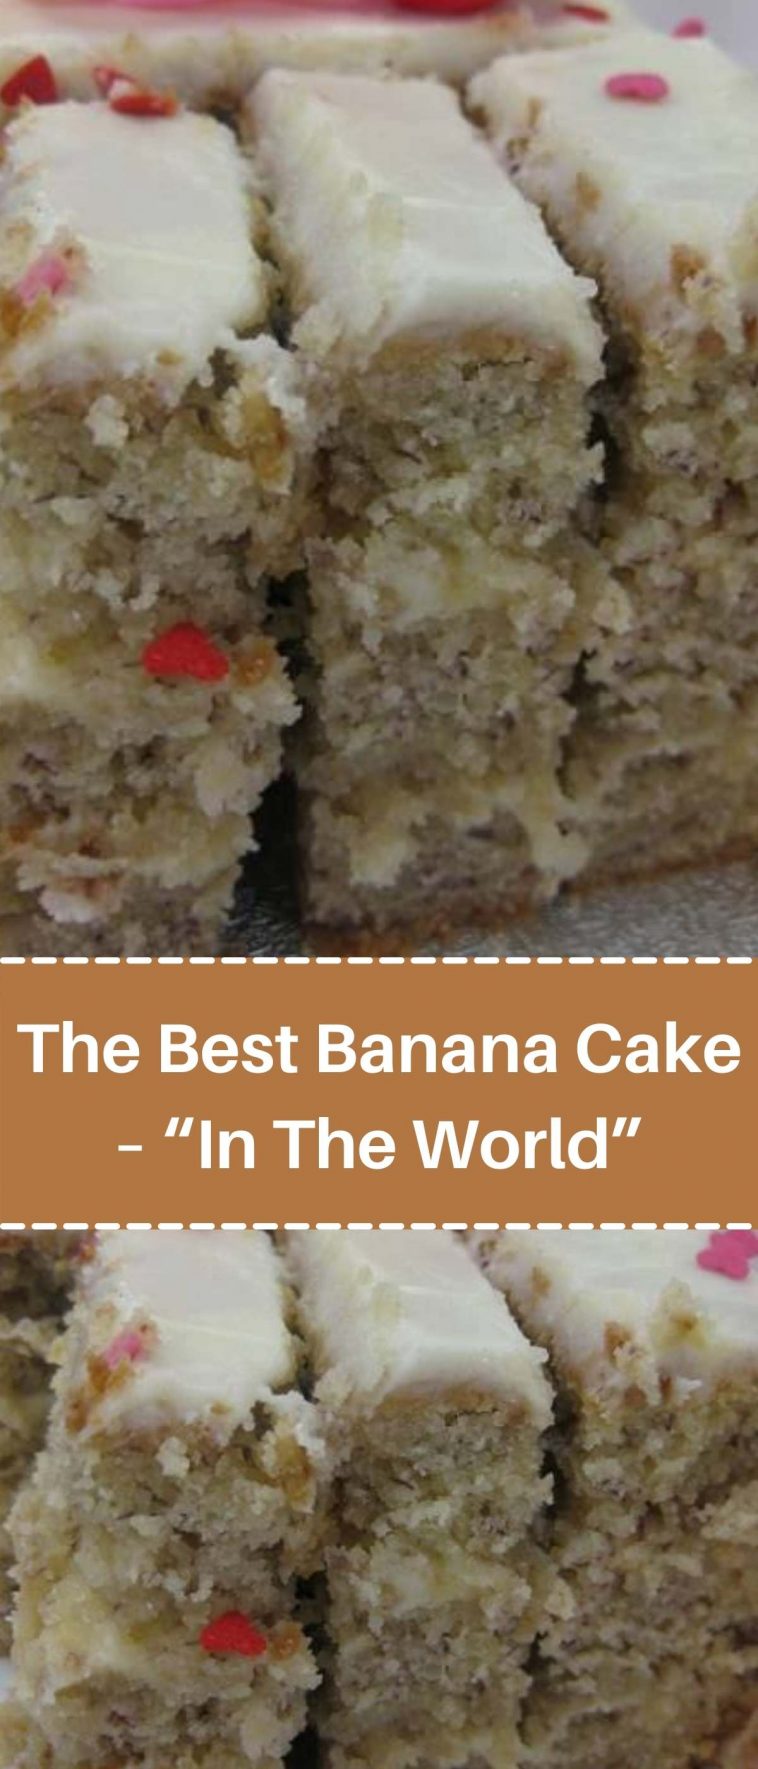 The Best Banana Cake – “In The World”